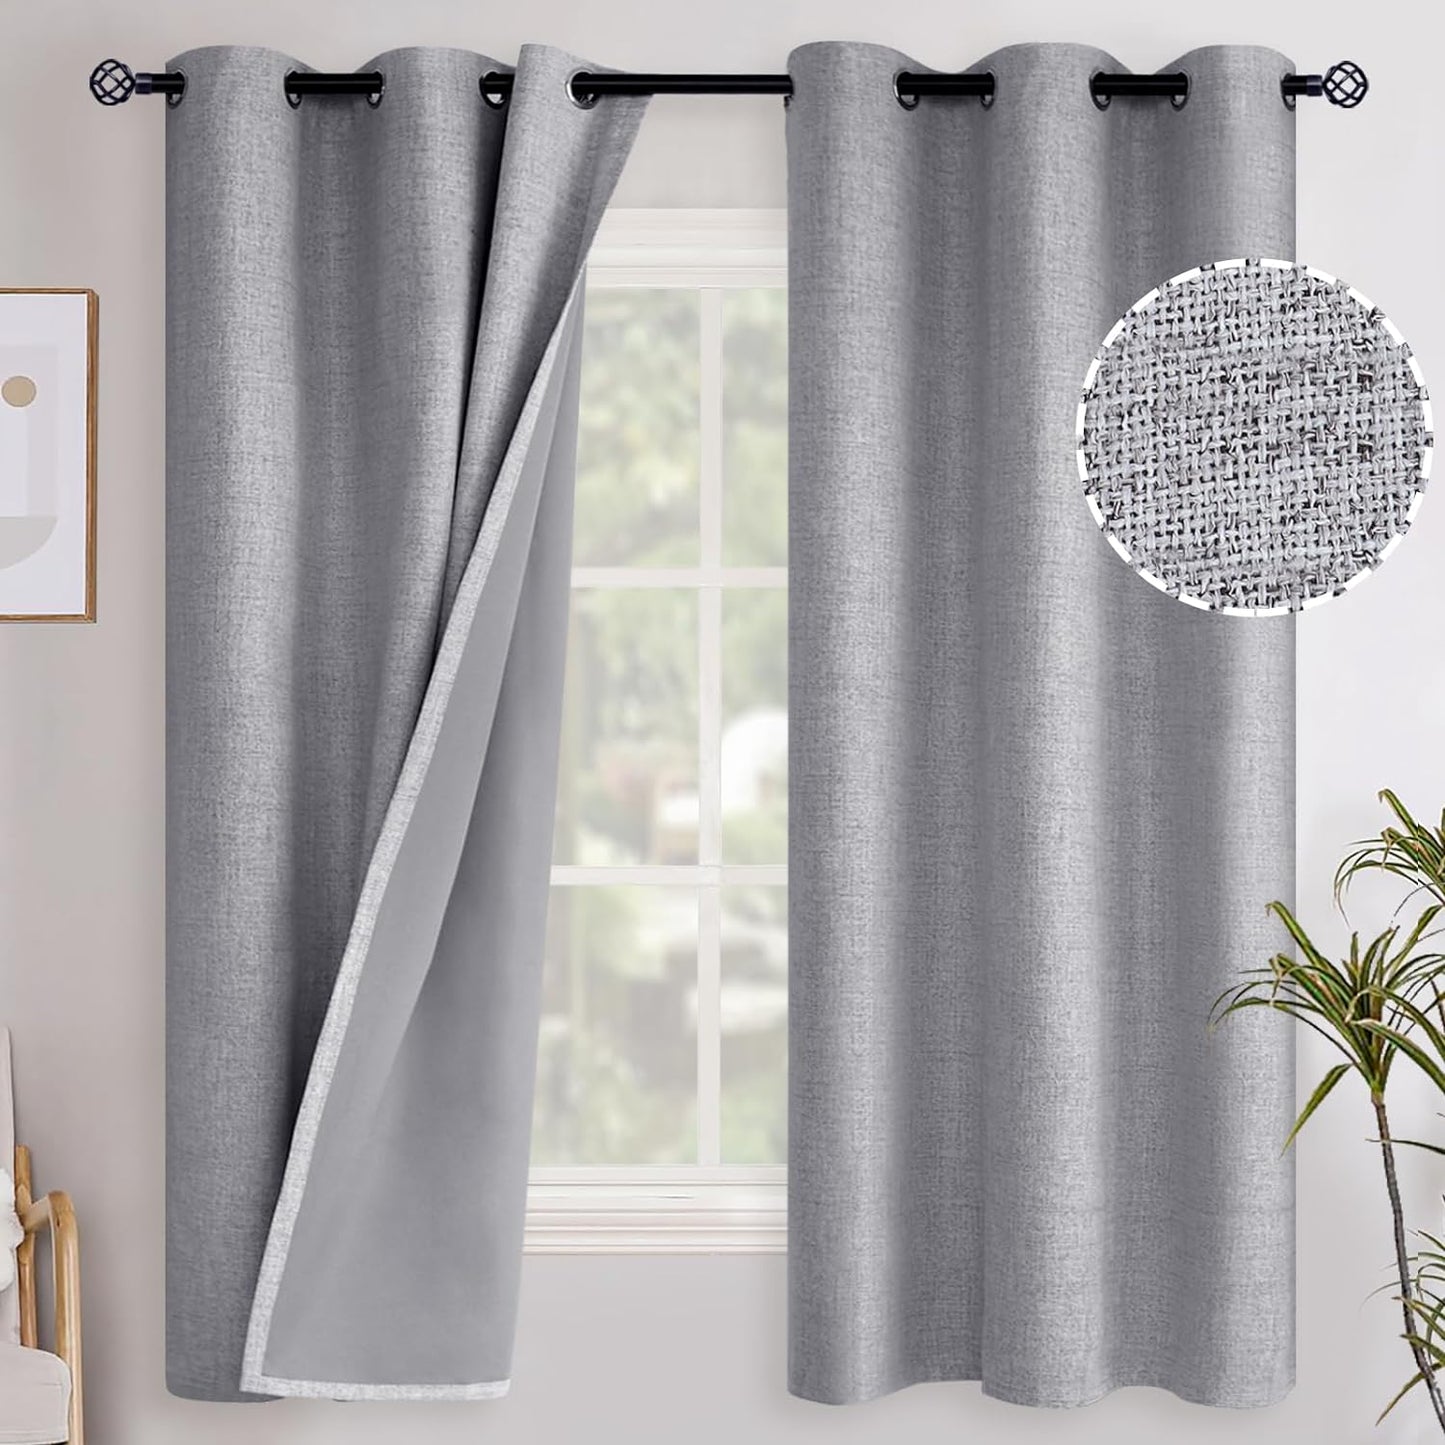 Youngstex Linen Blackout Curtains 63 Inch Length, Grommet Darkening Bedroom Curtains Burlap Linen Window Drapes Thermal Insulated for Basement Summer Heat, 2 Panels, 52 X 63 Inch, Beige  YoungsTex Grey 42W X 63L 